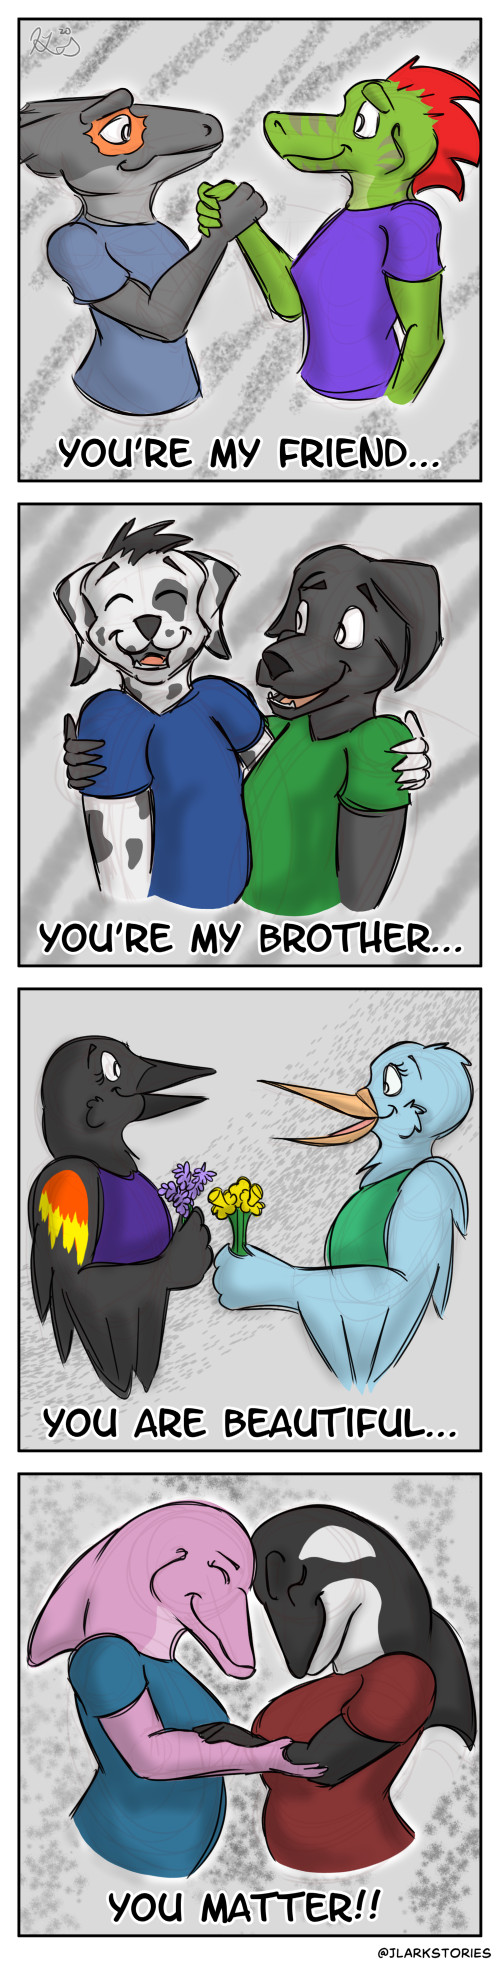 Ine clasps hands with a crocodile skink, a dark-skinned lizard with a red pattern around his eye. The caption beneath them says, "You're my friend…" Chris and a black lab laugh together with their arms around each other's shoulders. The caption says, "You're my brother…" Mally holds a few daffodils out to a red-winged blackbird who is holding several stalks of lavender. The caption says, "You are beautiful…" June hugs an orca, the two of them touching foreheads. The final caption says, "You matter!!"